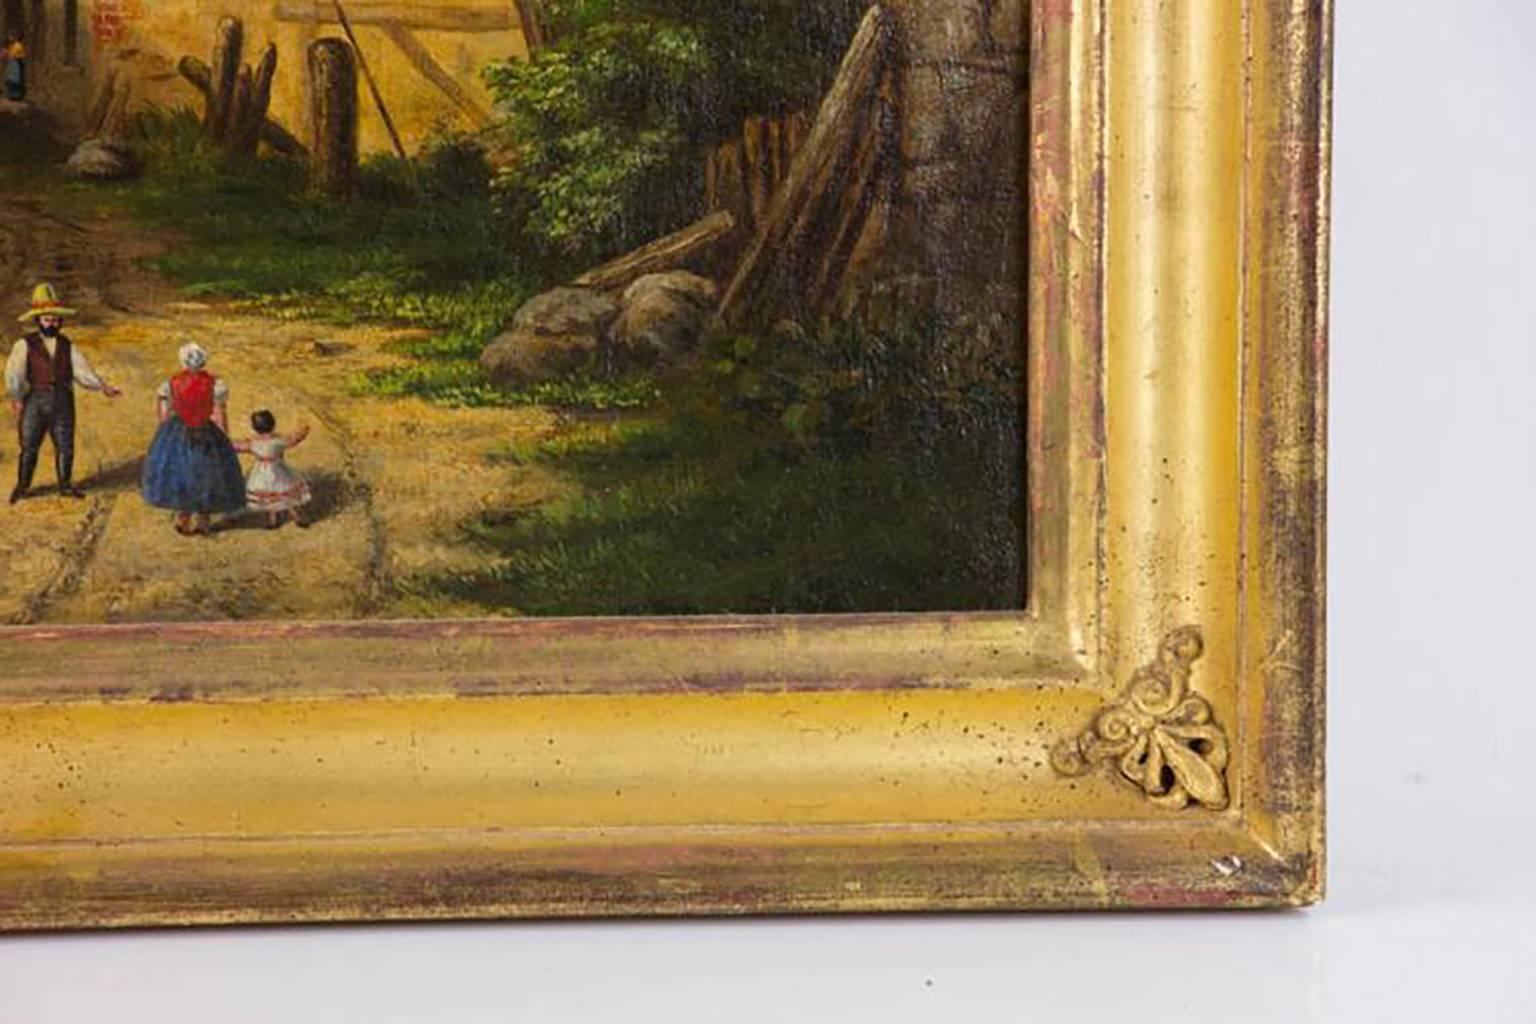 Very Nice Oil Painting by American Artist Samuel S. Kilburn, Jr. (19th century)  Entitled “Armenian Village”  Dated 1849   Oil on Canvas  Marked on verso “S.S. Kilburn Jr., 1849″  Housed in a beautiful antique gold gilded wood frame  Measures 18